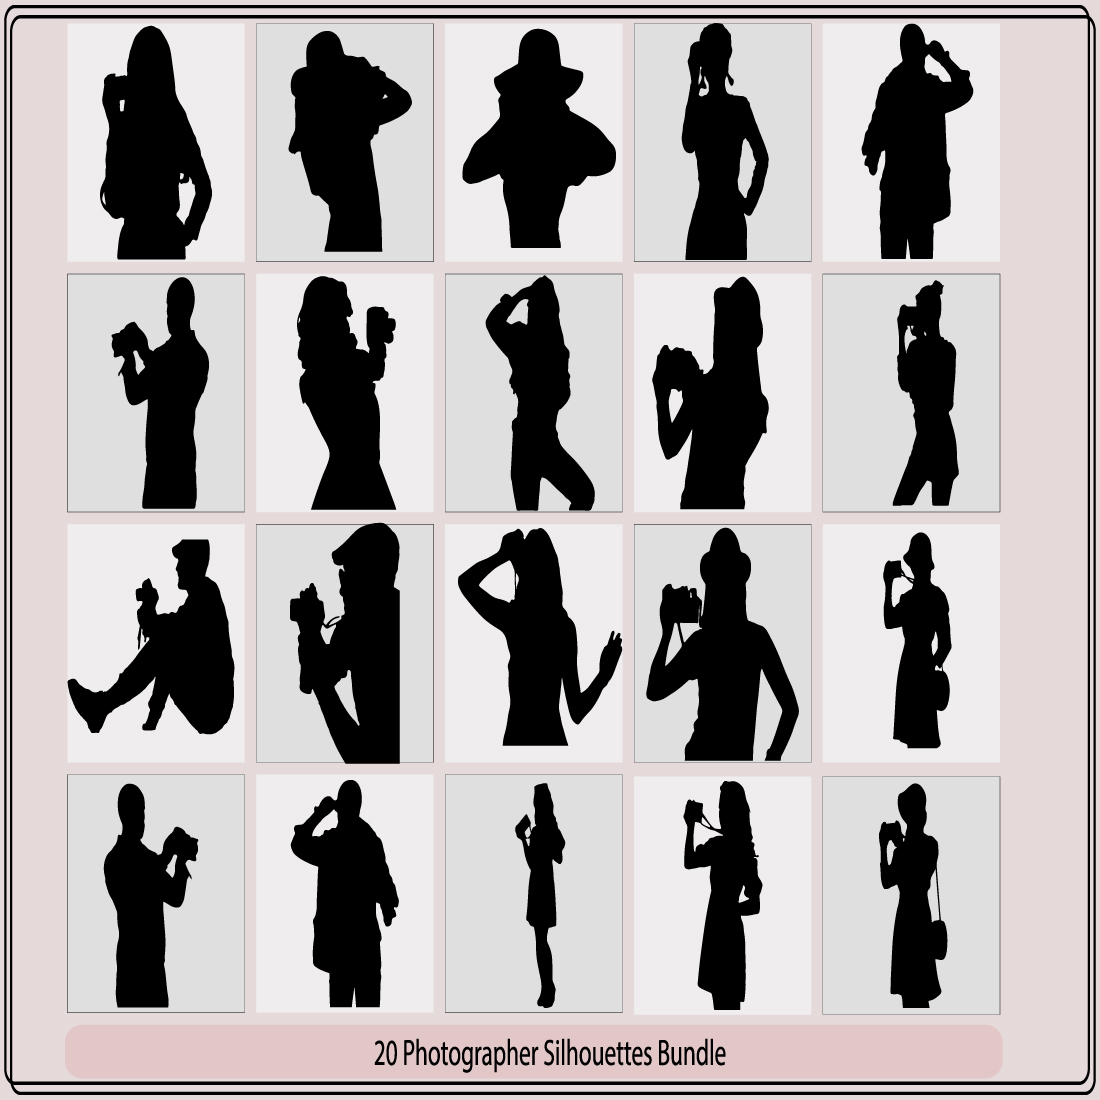 Photographers silhouettes ,photographers silhouettes collection,Set silhouettes man photographing,Realistic illustration of silhouettes of a standing and kneeling man photographer preview image.